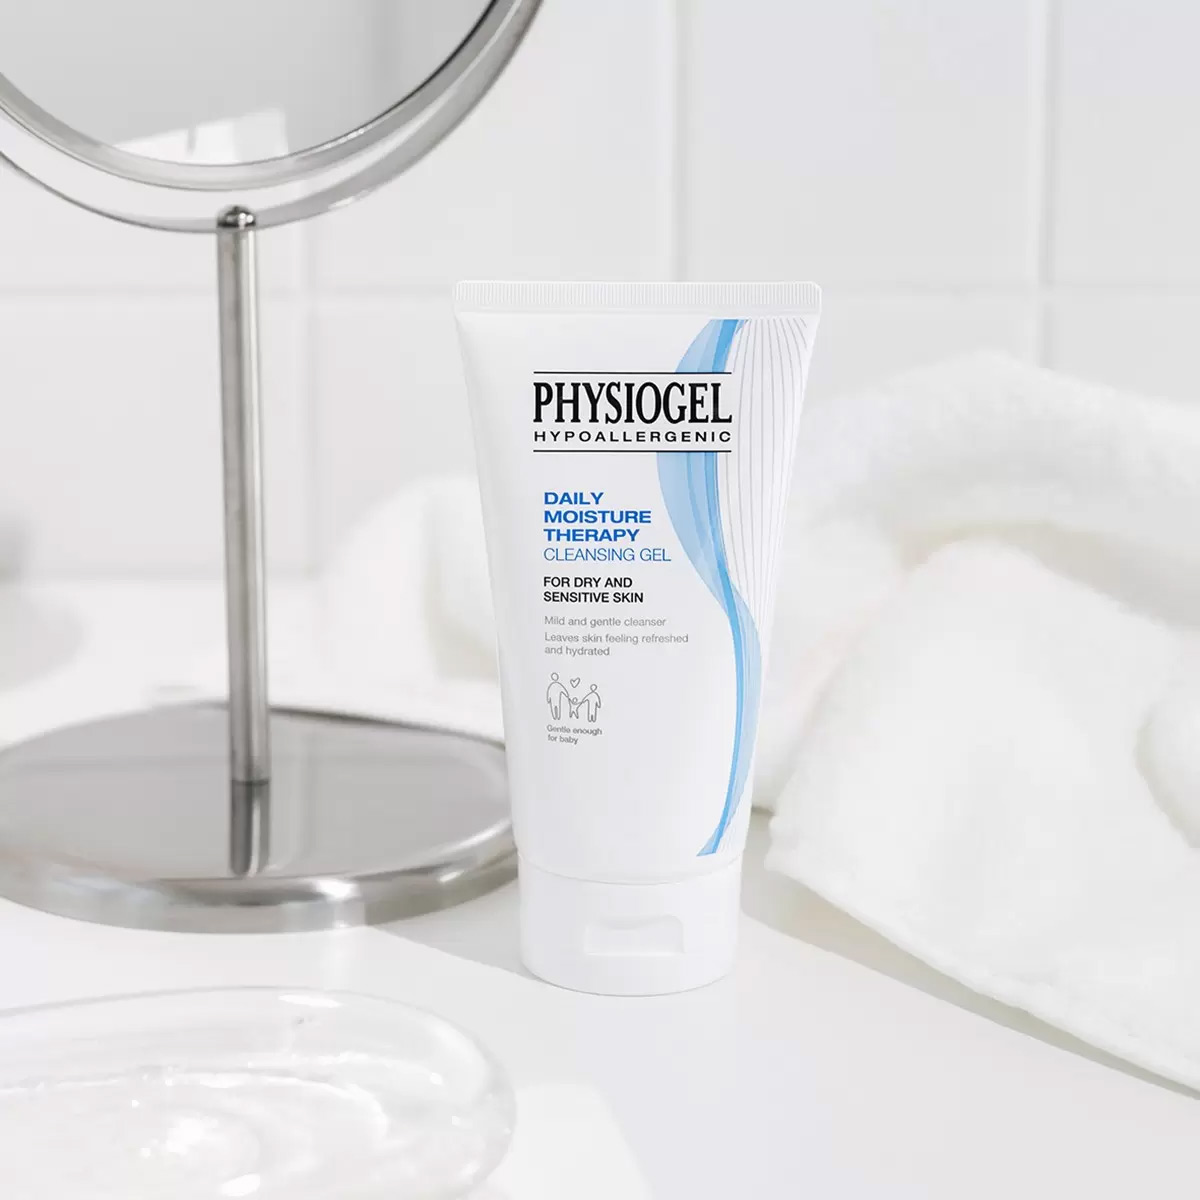 Physiogel Daily Moisture Therapy Cleansing Gel